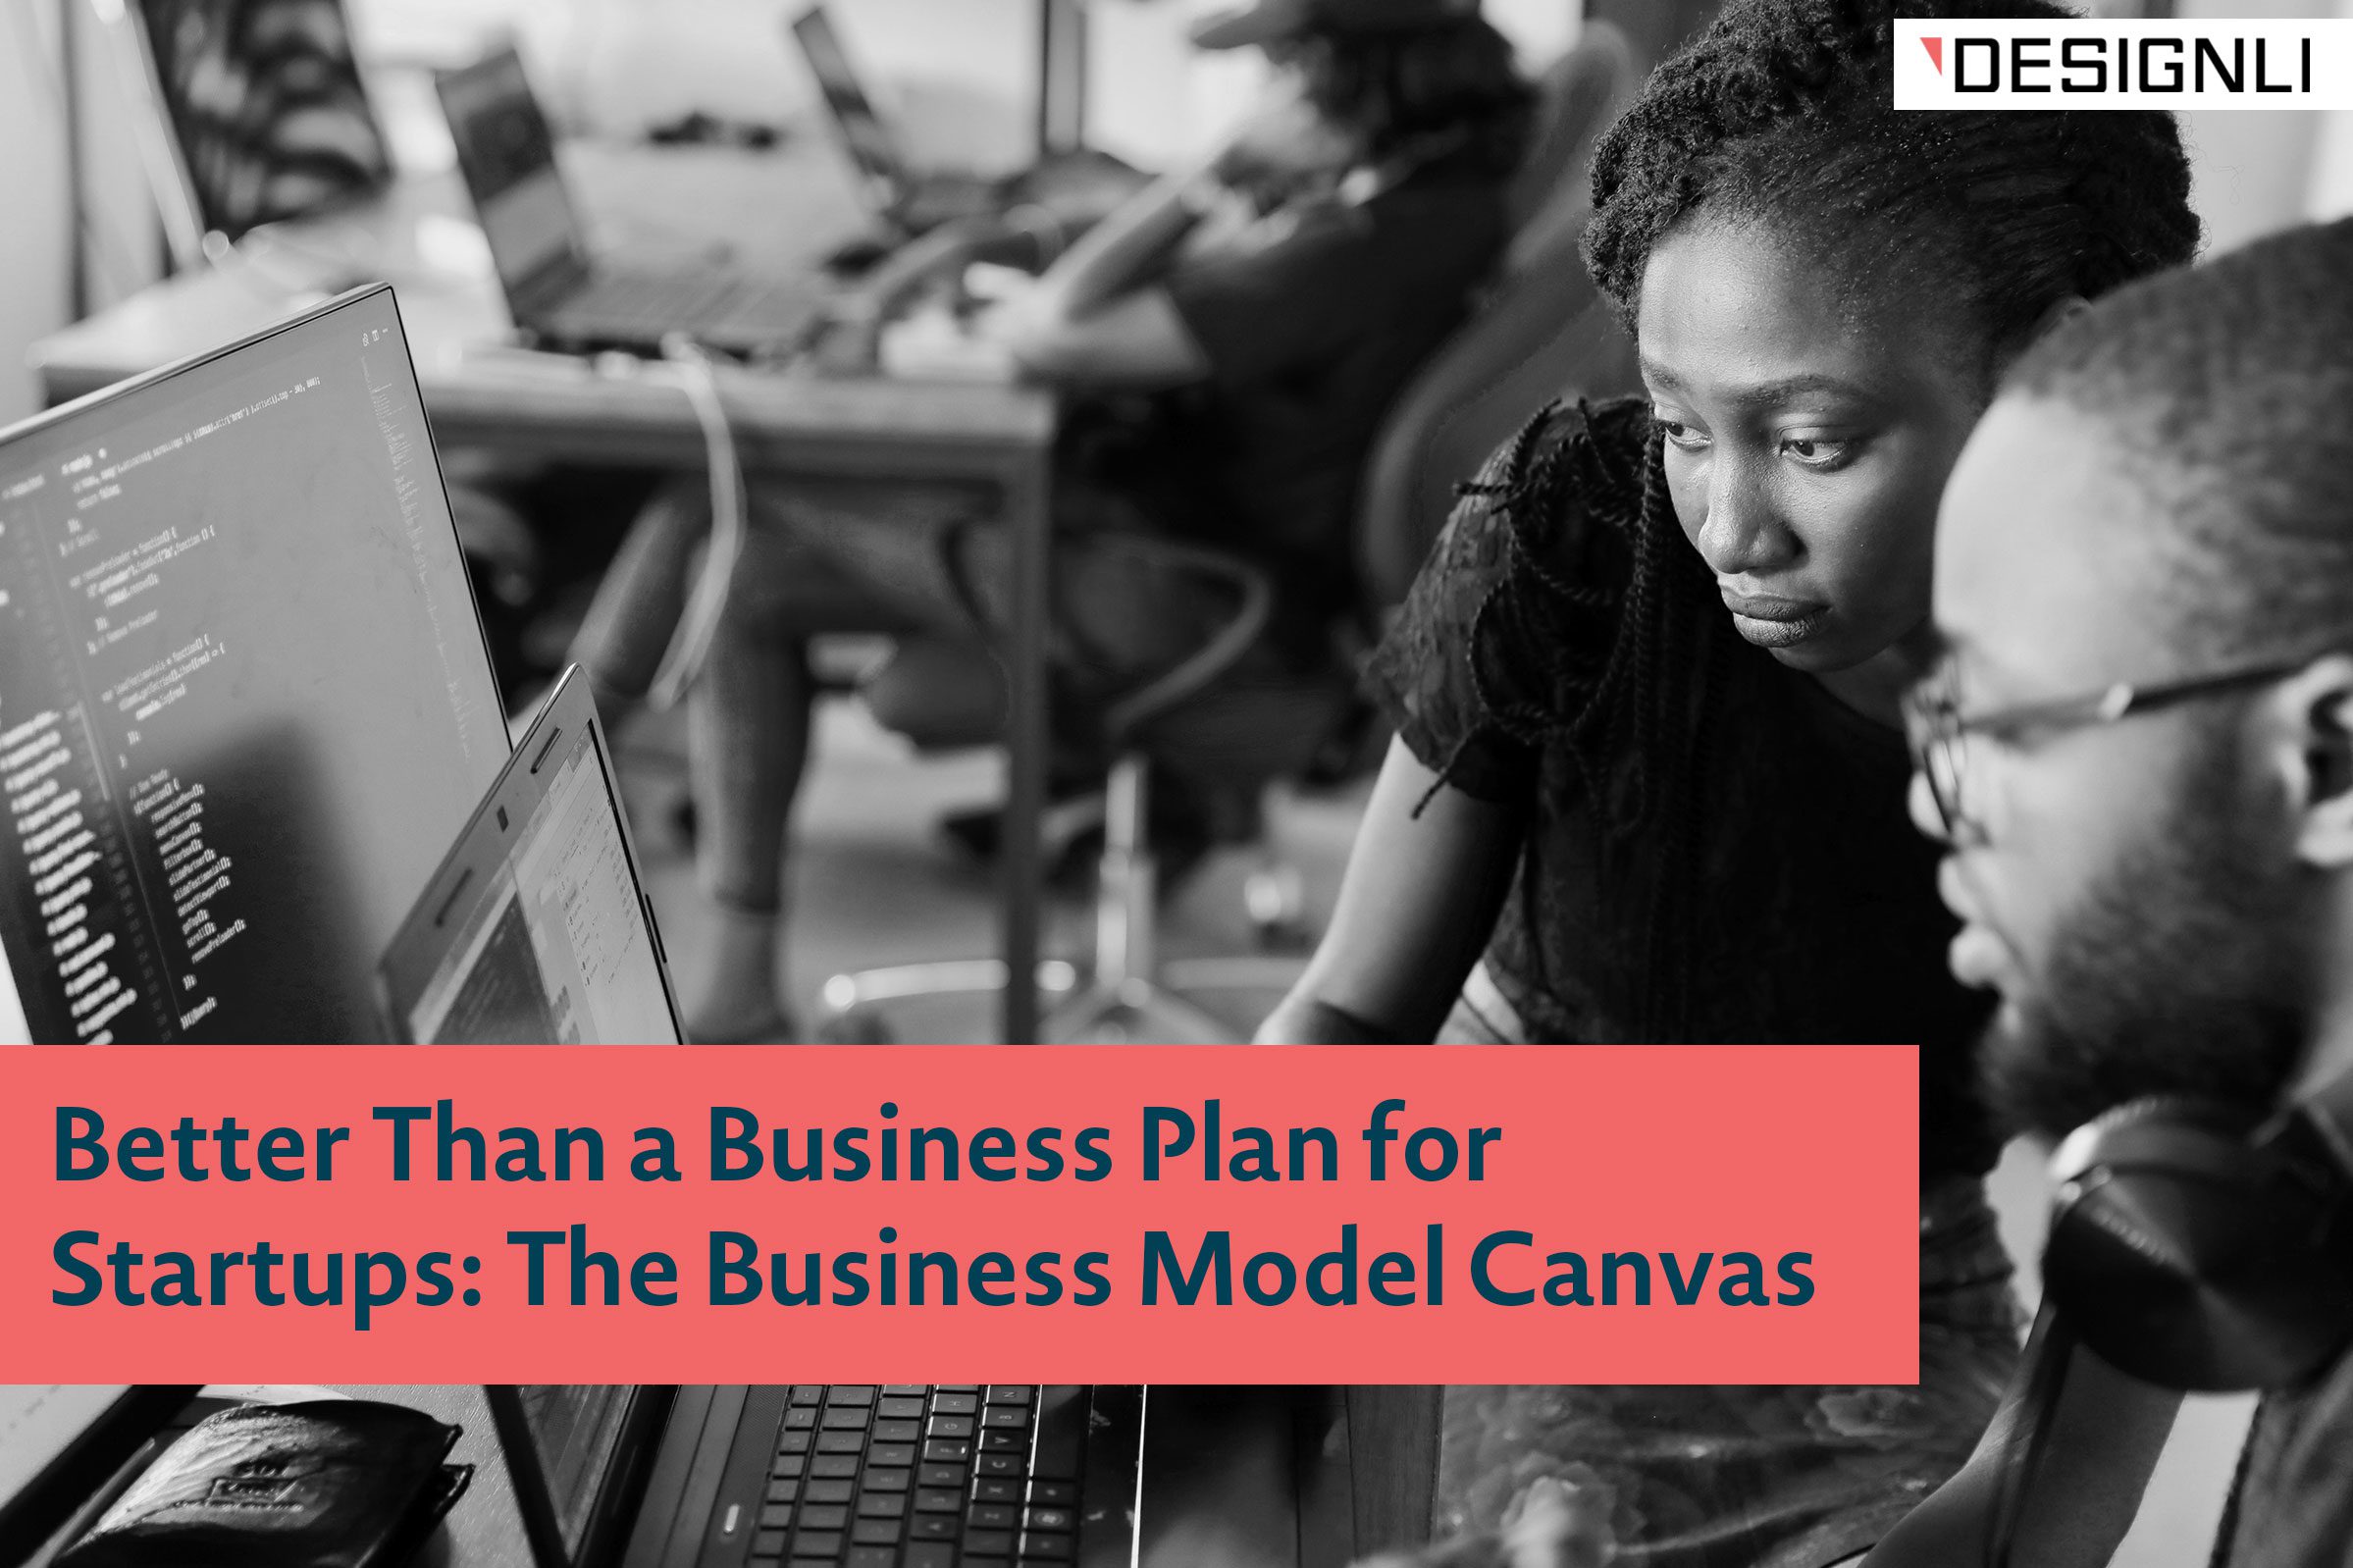 Better Than a Business Plan for Startups: The Business Model Canvas